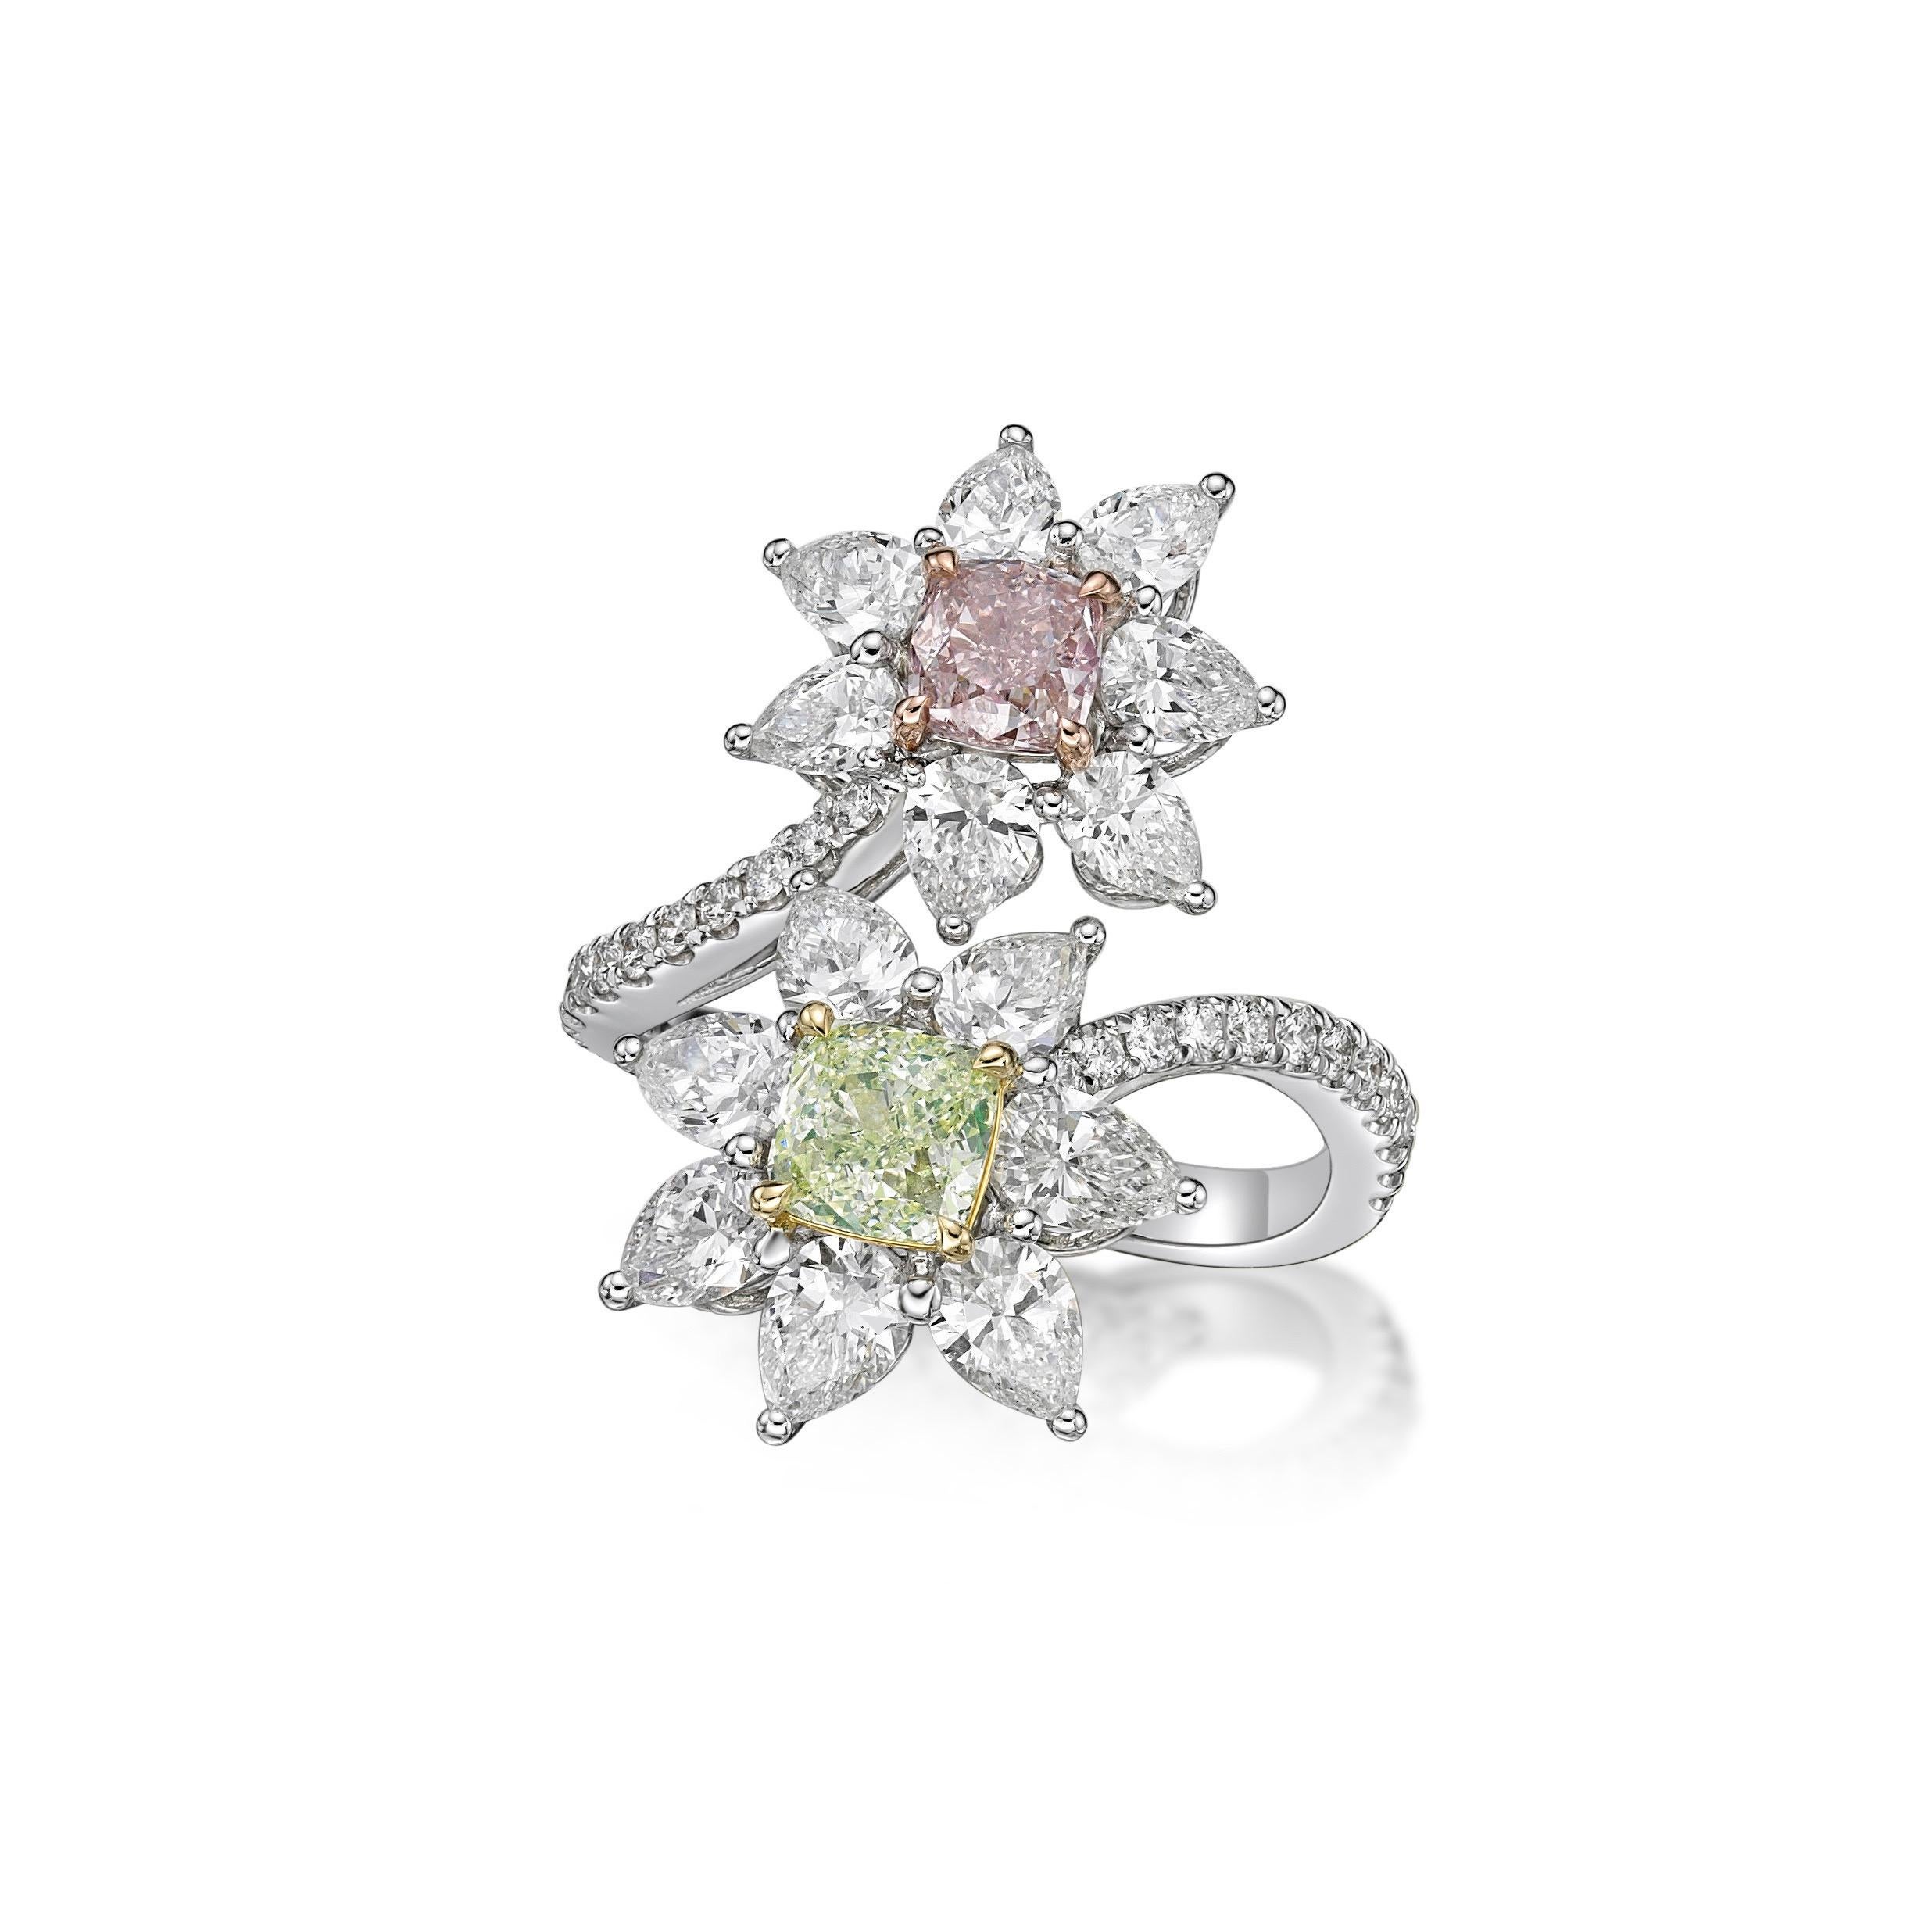 2 cushion diamonds Gia certified natural fancy green, and fancy pink totaling 1.42cts in the center,
14 diamonds total 2.40ct
24 small diamonds total 0.28ct

From The Vault at Emilio Jewelry Located on New York's iconic Fifth Avenue,Total weight